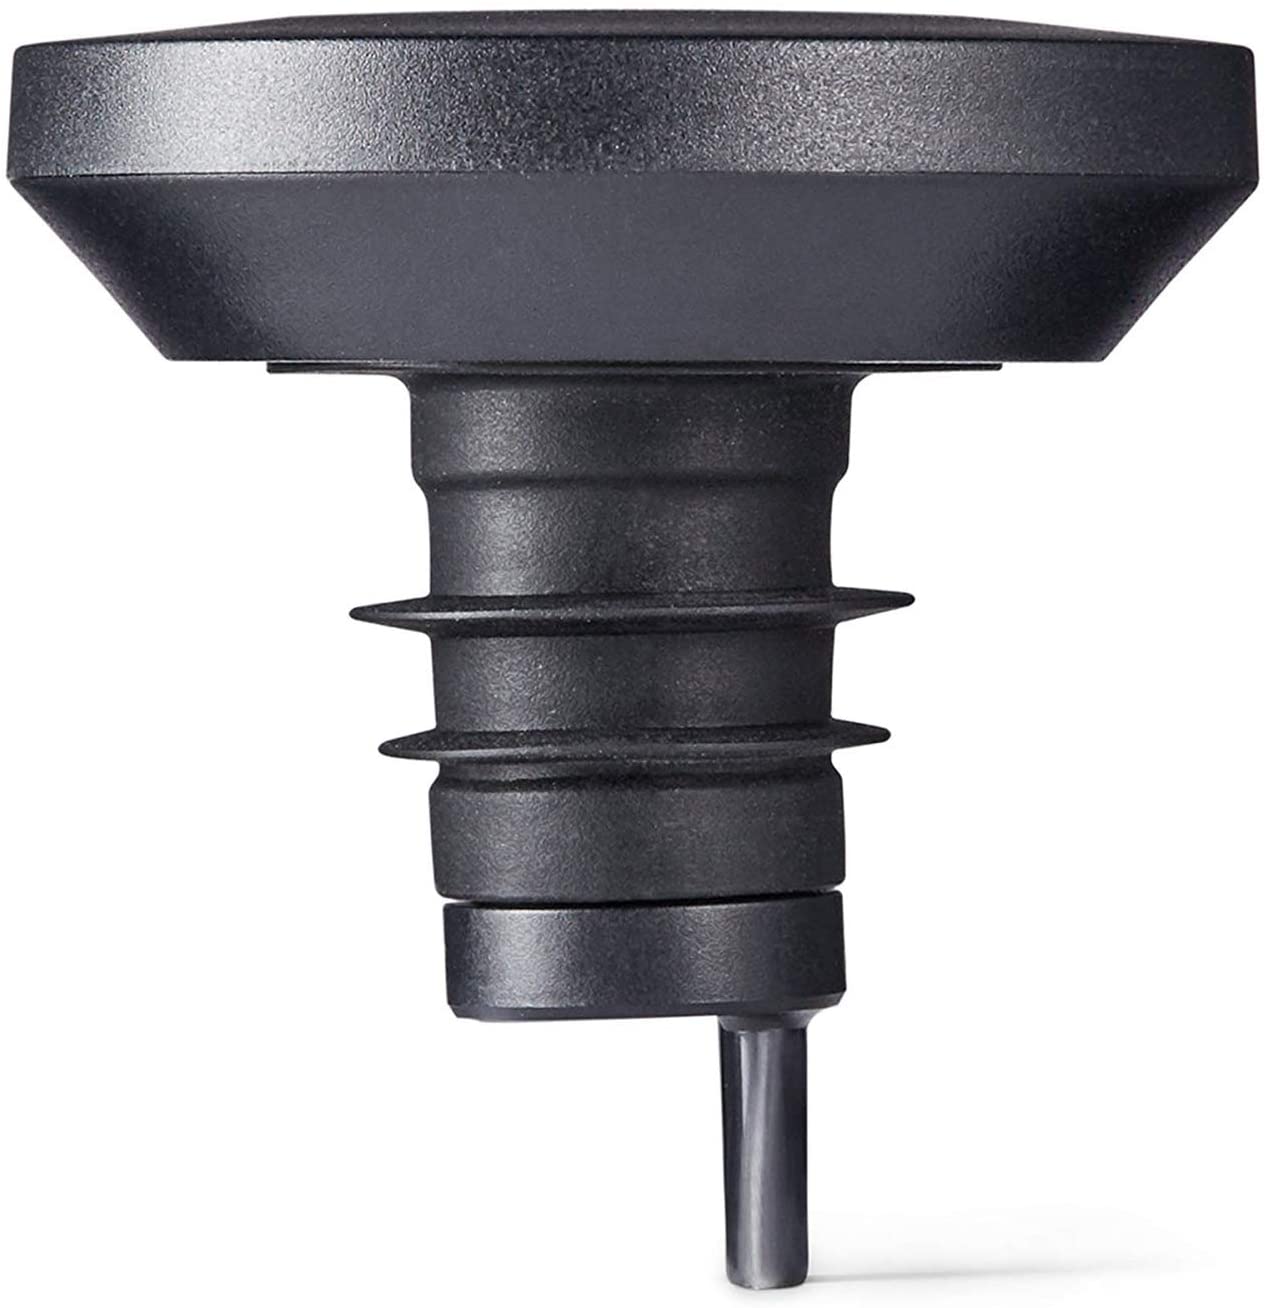 zzysh Wine stopper in black. Only works with the ZZYSH wine stopper system.